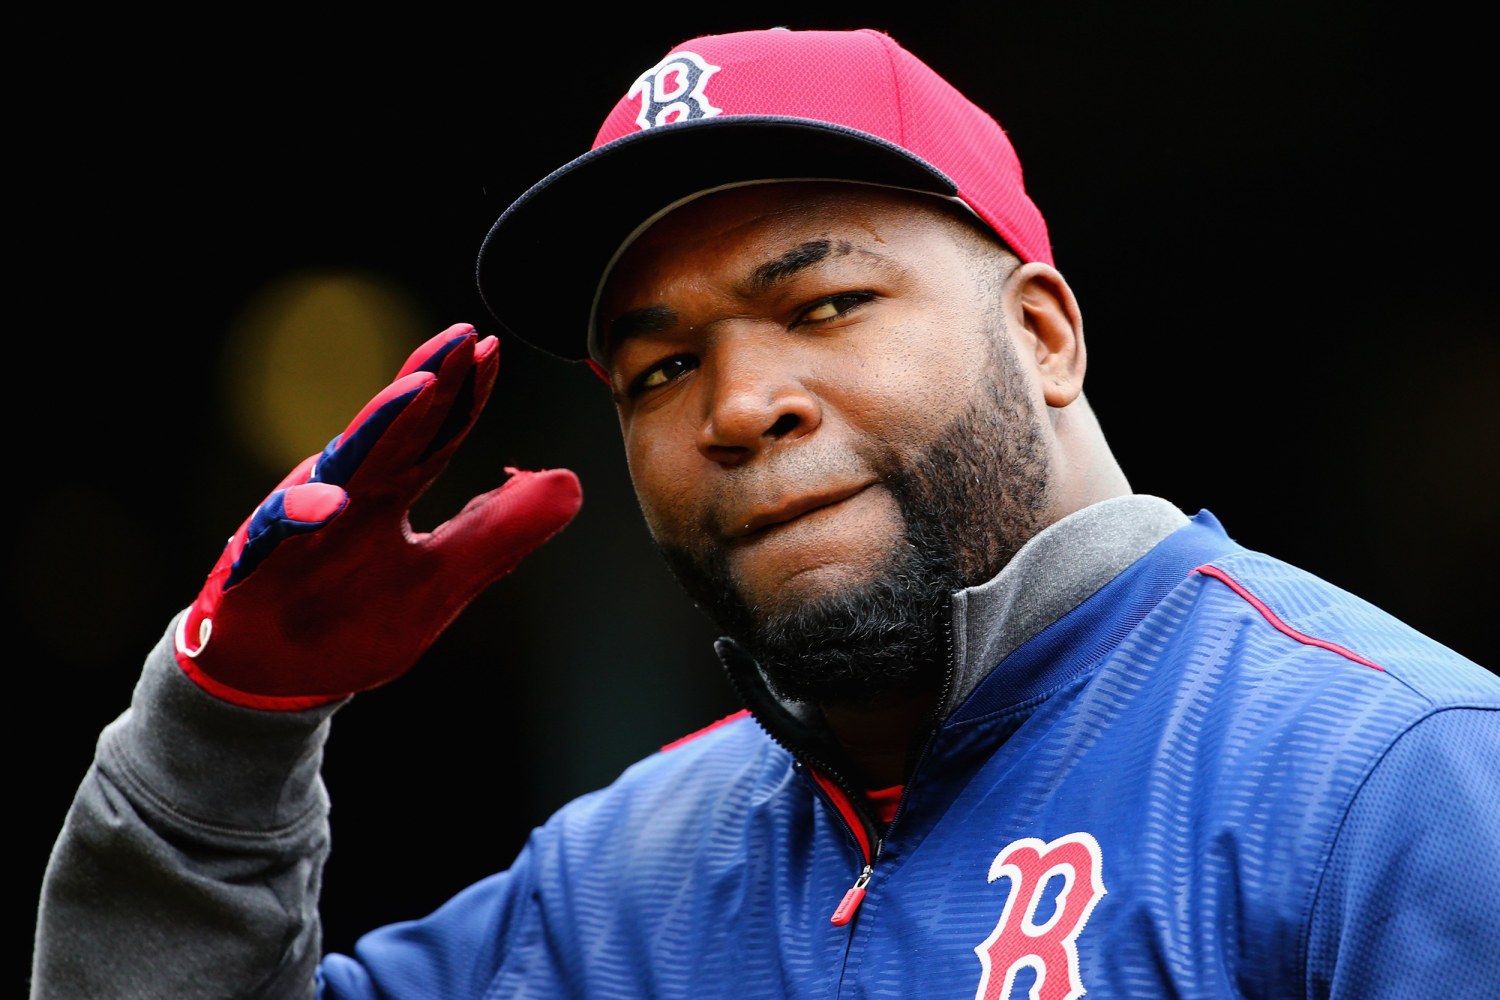 David Ortiz undergoes surgery in Boston; will remain in ICU for several days